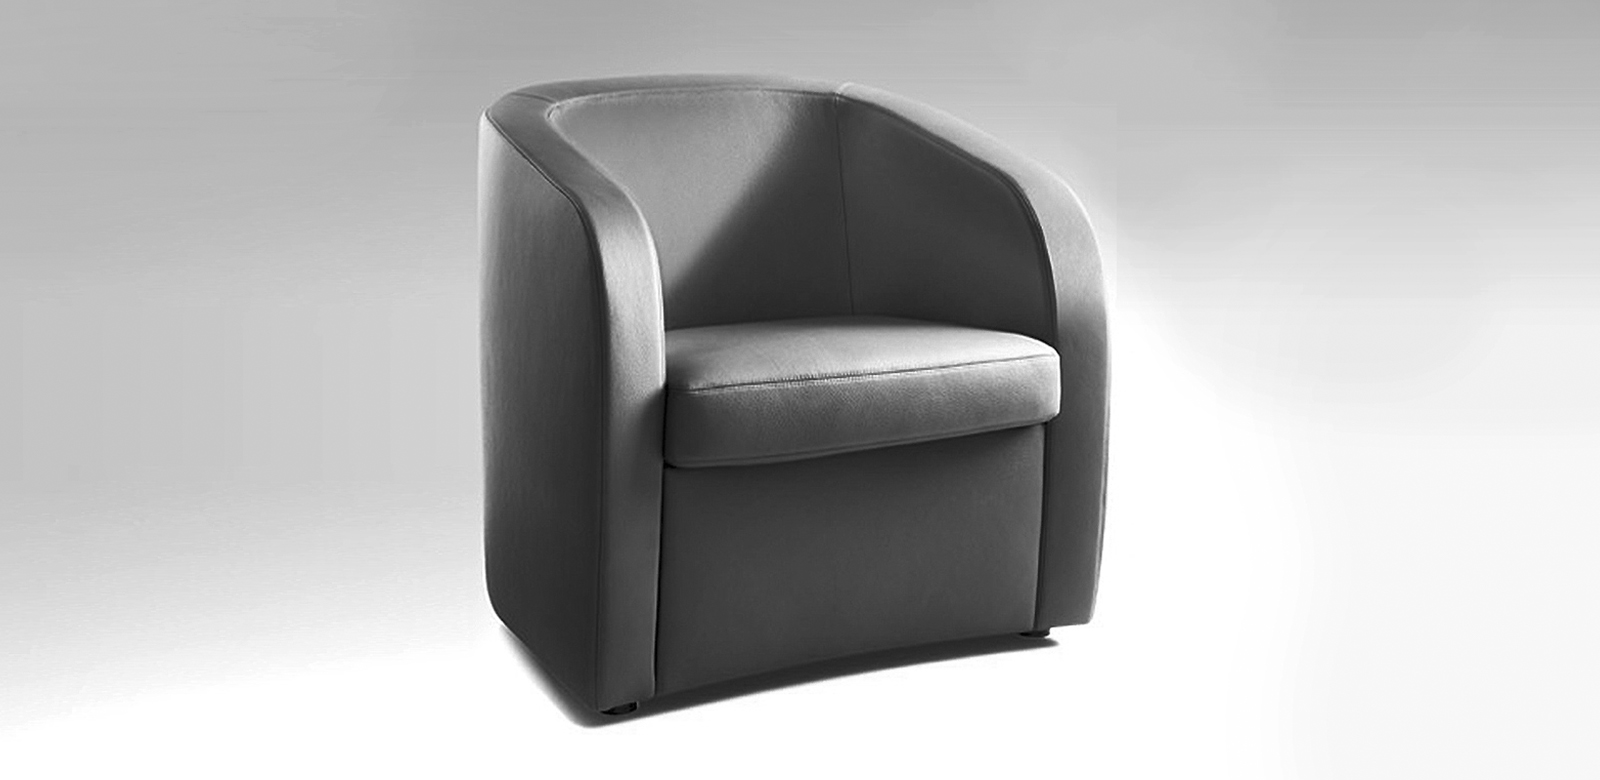 Armchair CL130 in black leather